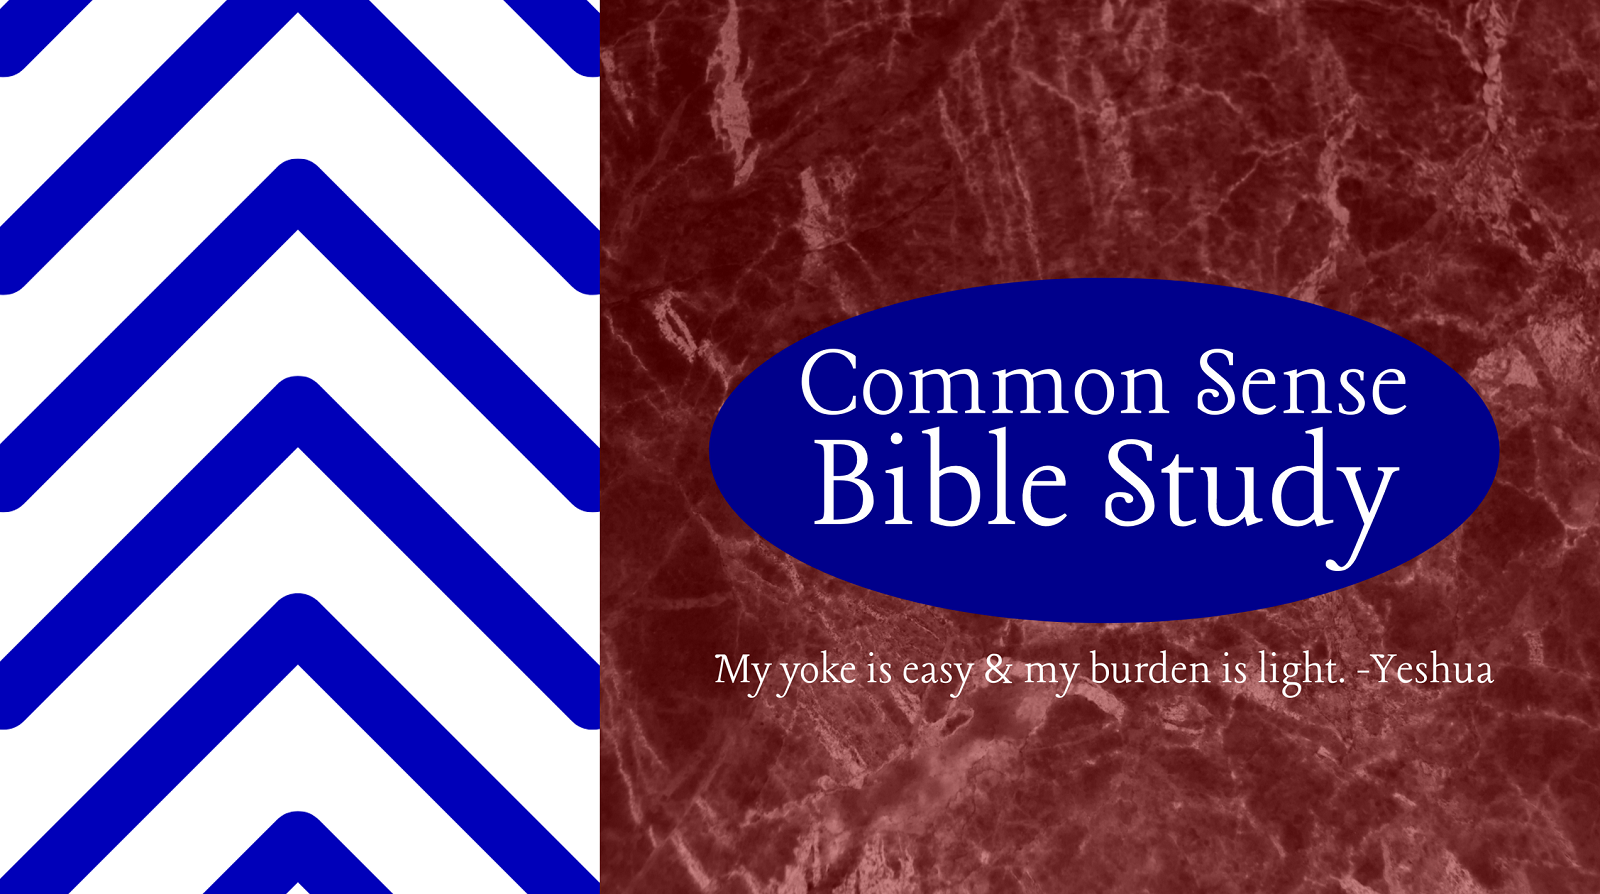 Common Sense Bible Study and The Chiasm Course